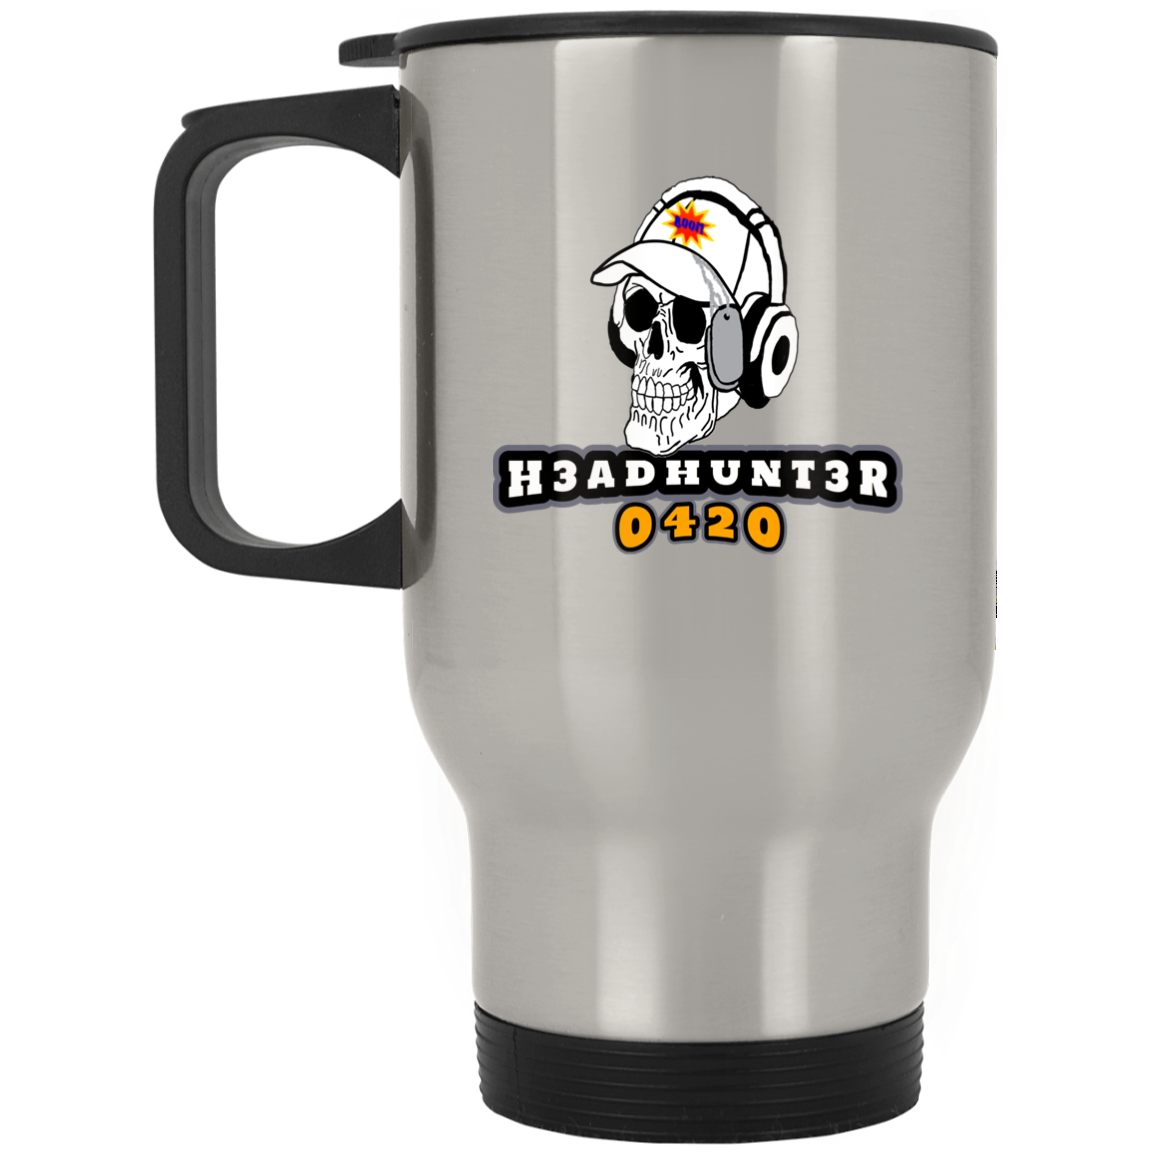 s-hh STAINLESS STEEL TRAVEL MUG